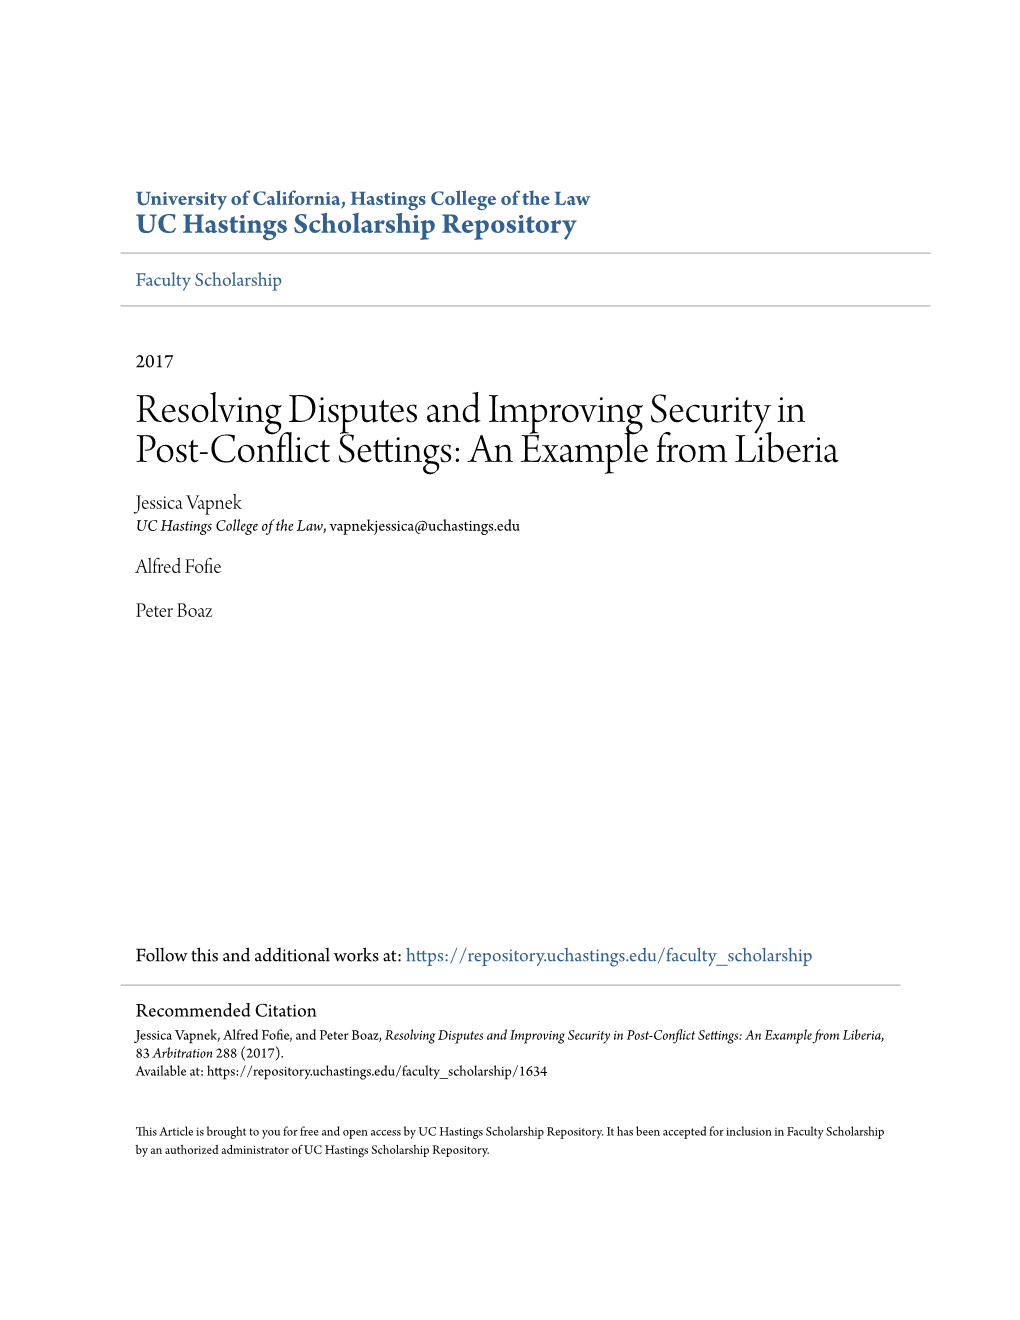 Resolving Disputes and Improving Security in Post-Conflict Settings